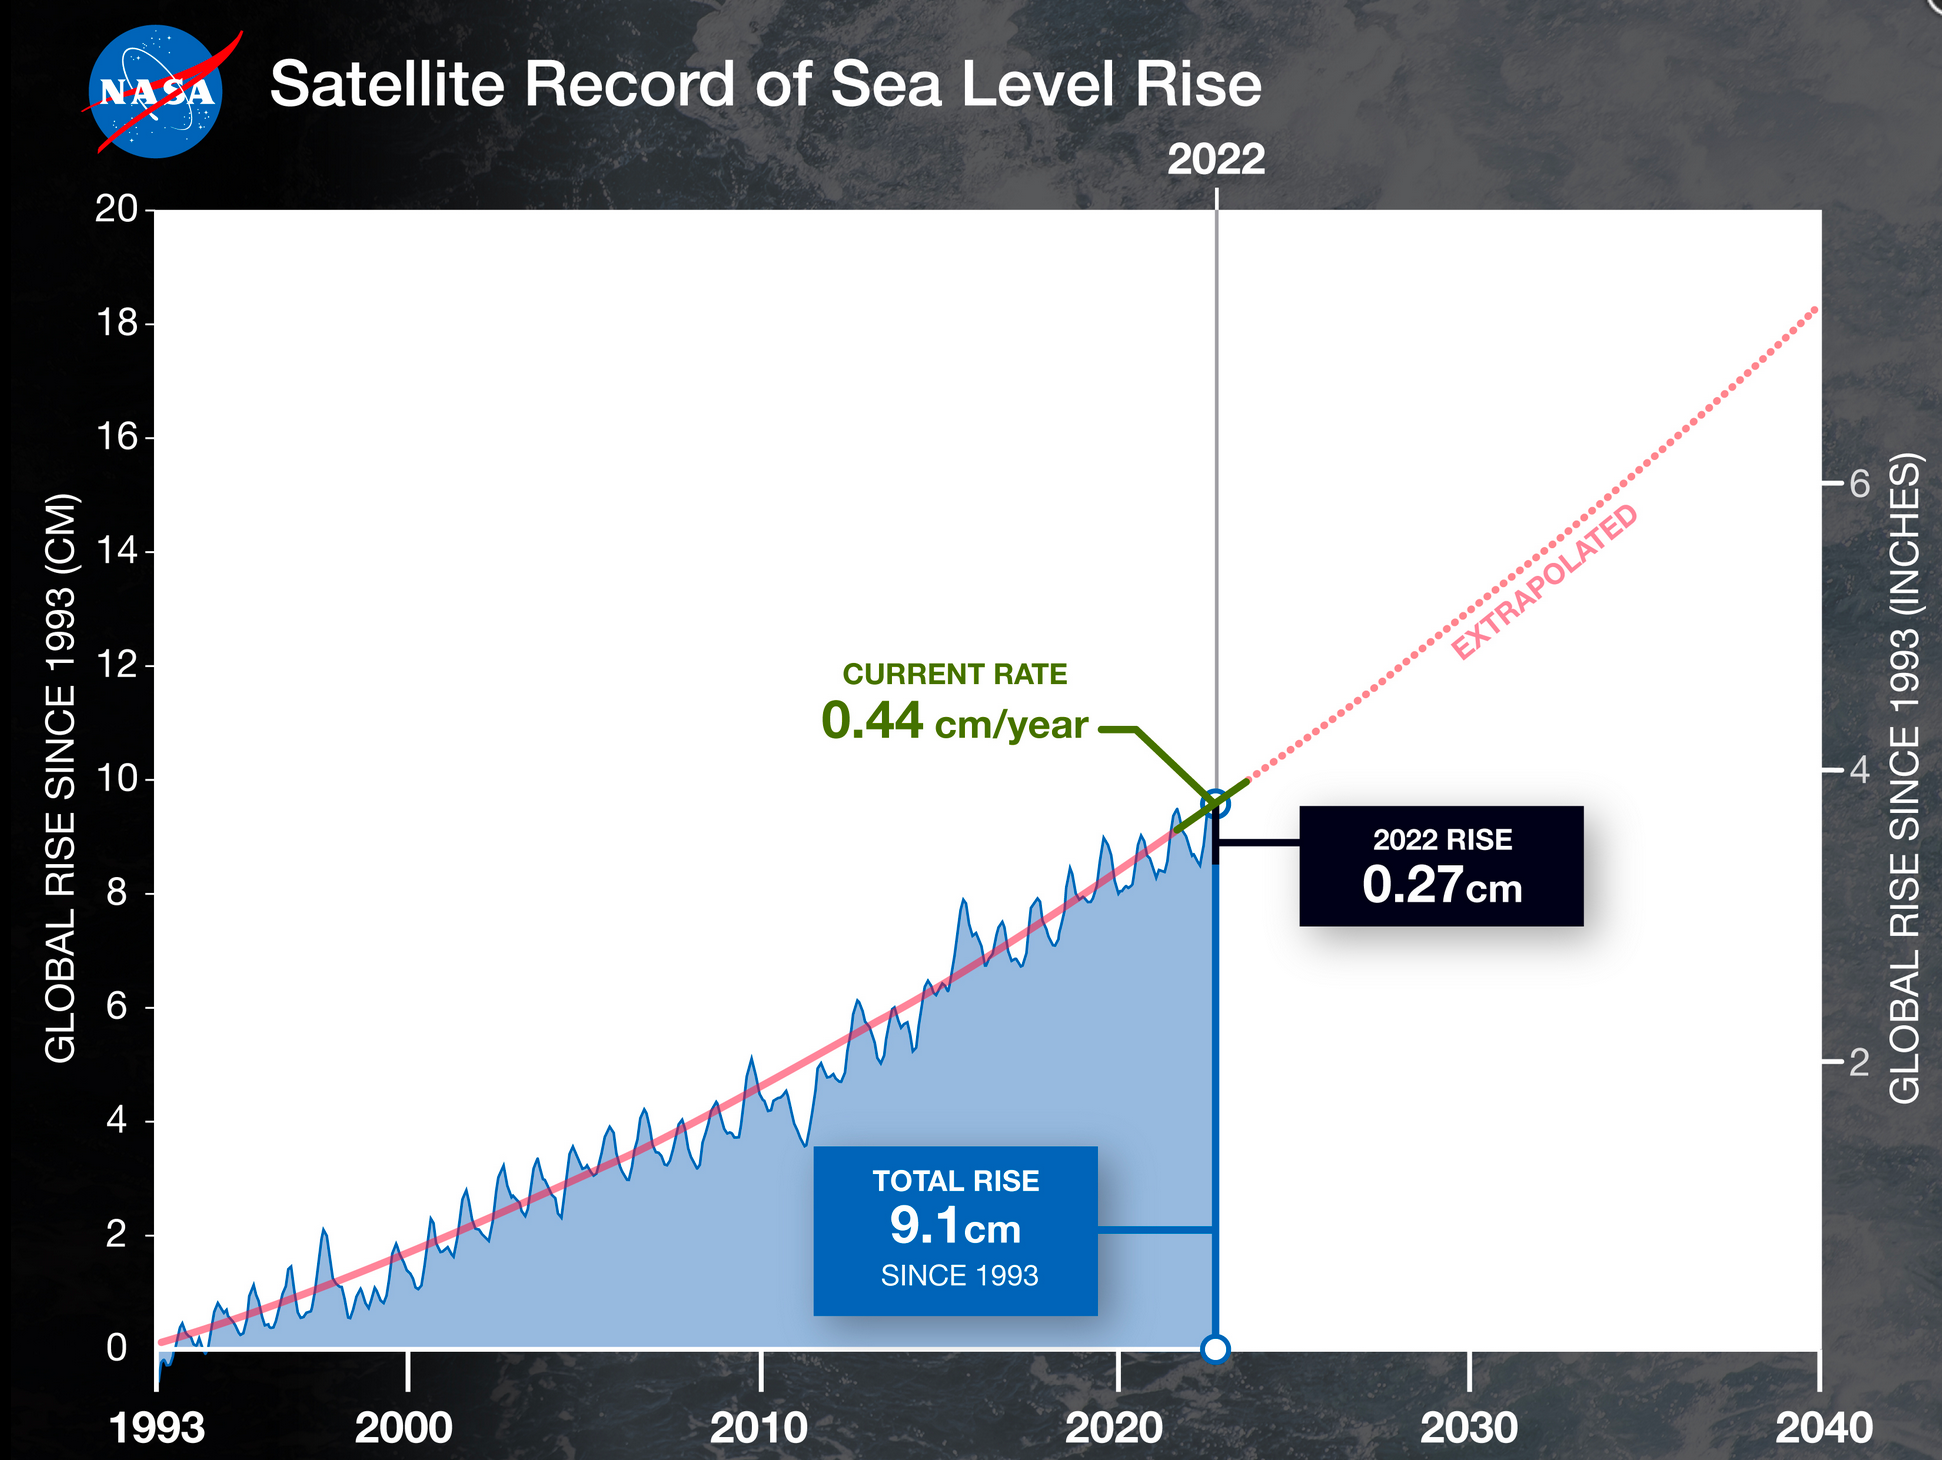  sea levels (in blue) from data recorded by a series of five satellites starting in 1993. The solid red line shows the trajectory of rise from 1993 to 2022, illustrating that the rate of rise has more than doubled. By 2040, sea levels could be 3.66 inches (9.3 cm) higher than today